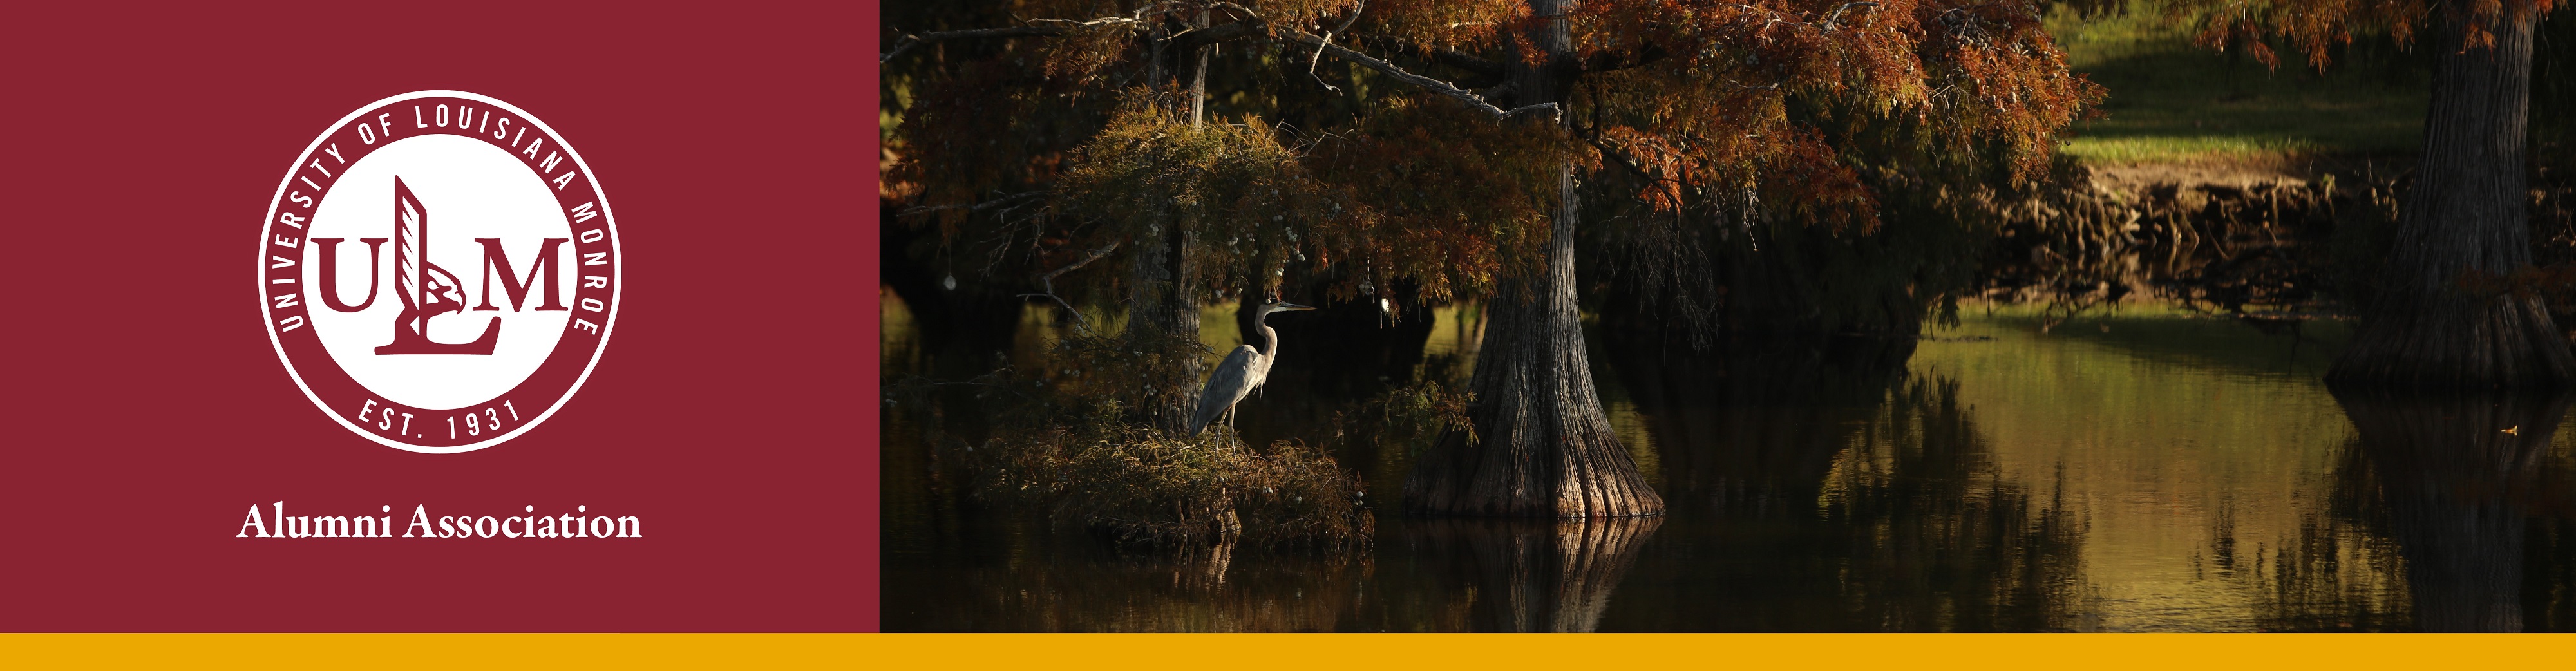 The ULM Alumni Association logo with an image of a heron on a cypress tree over a bayou.